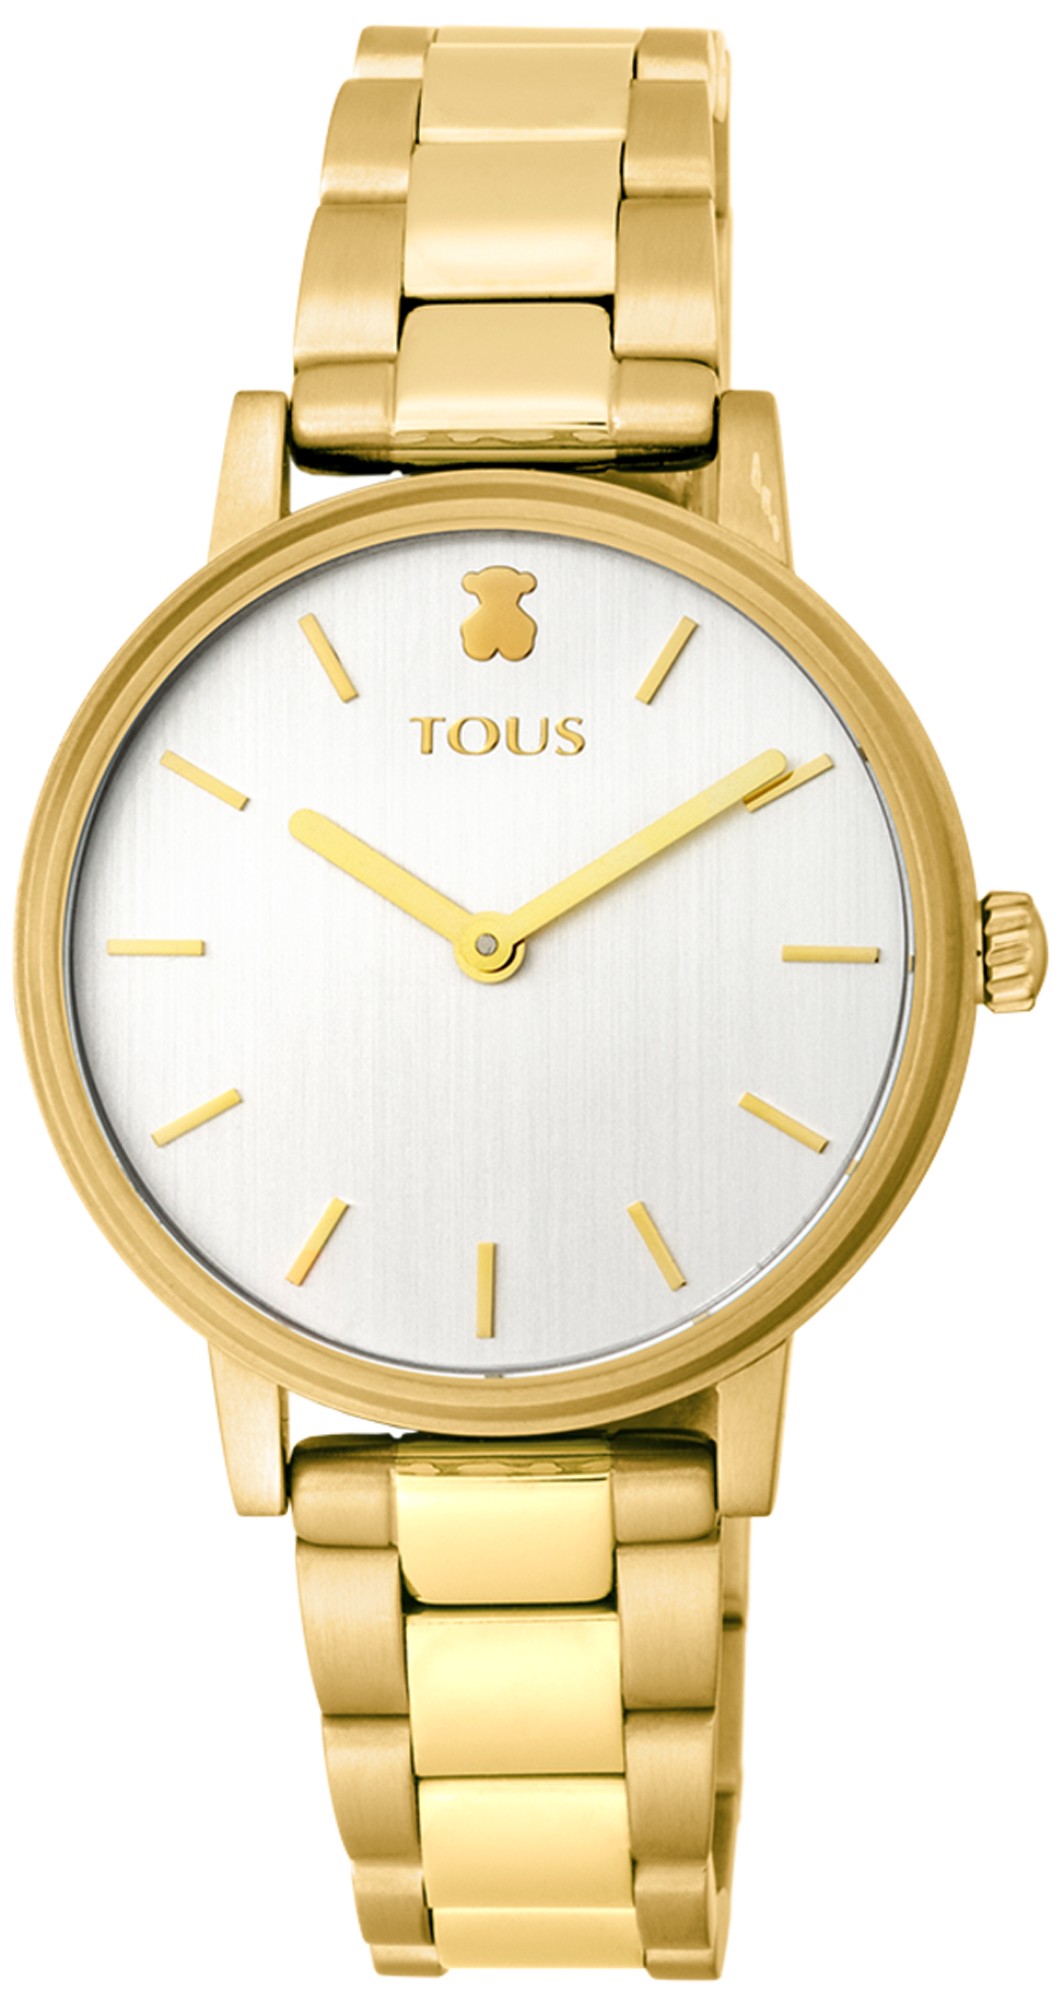 Tous Women's Watch Tous Watches Women's Watch with Stainless Steel Case and  Brown Leather Strap 151183 100350445 | Clicktime.eu» Comprar online -  Clicktime.eu